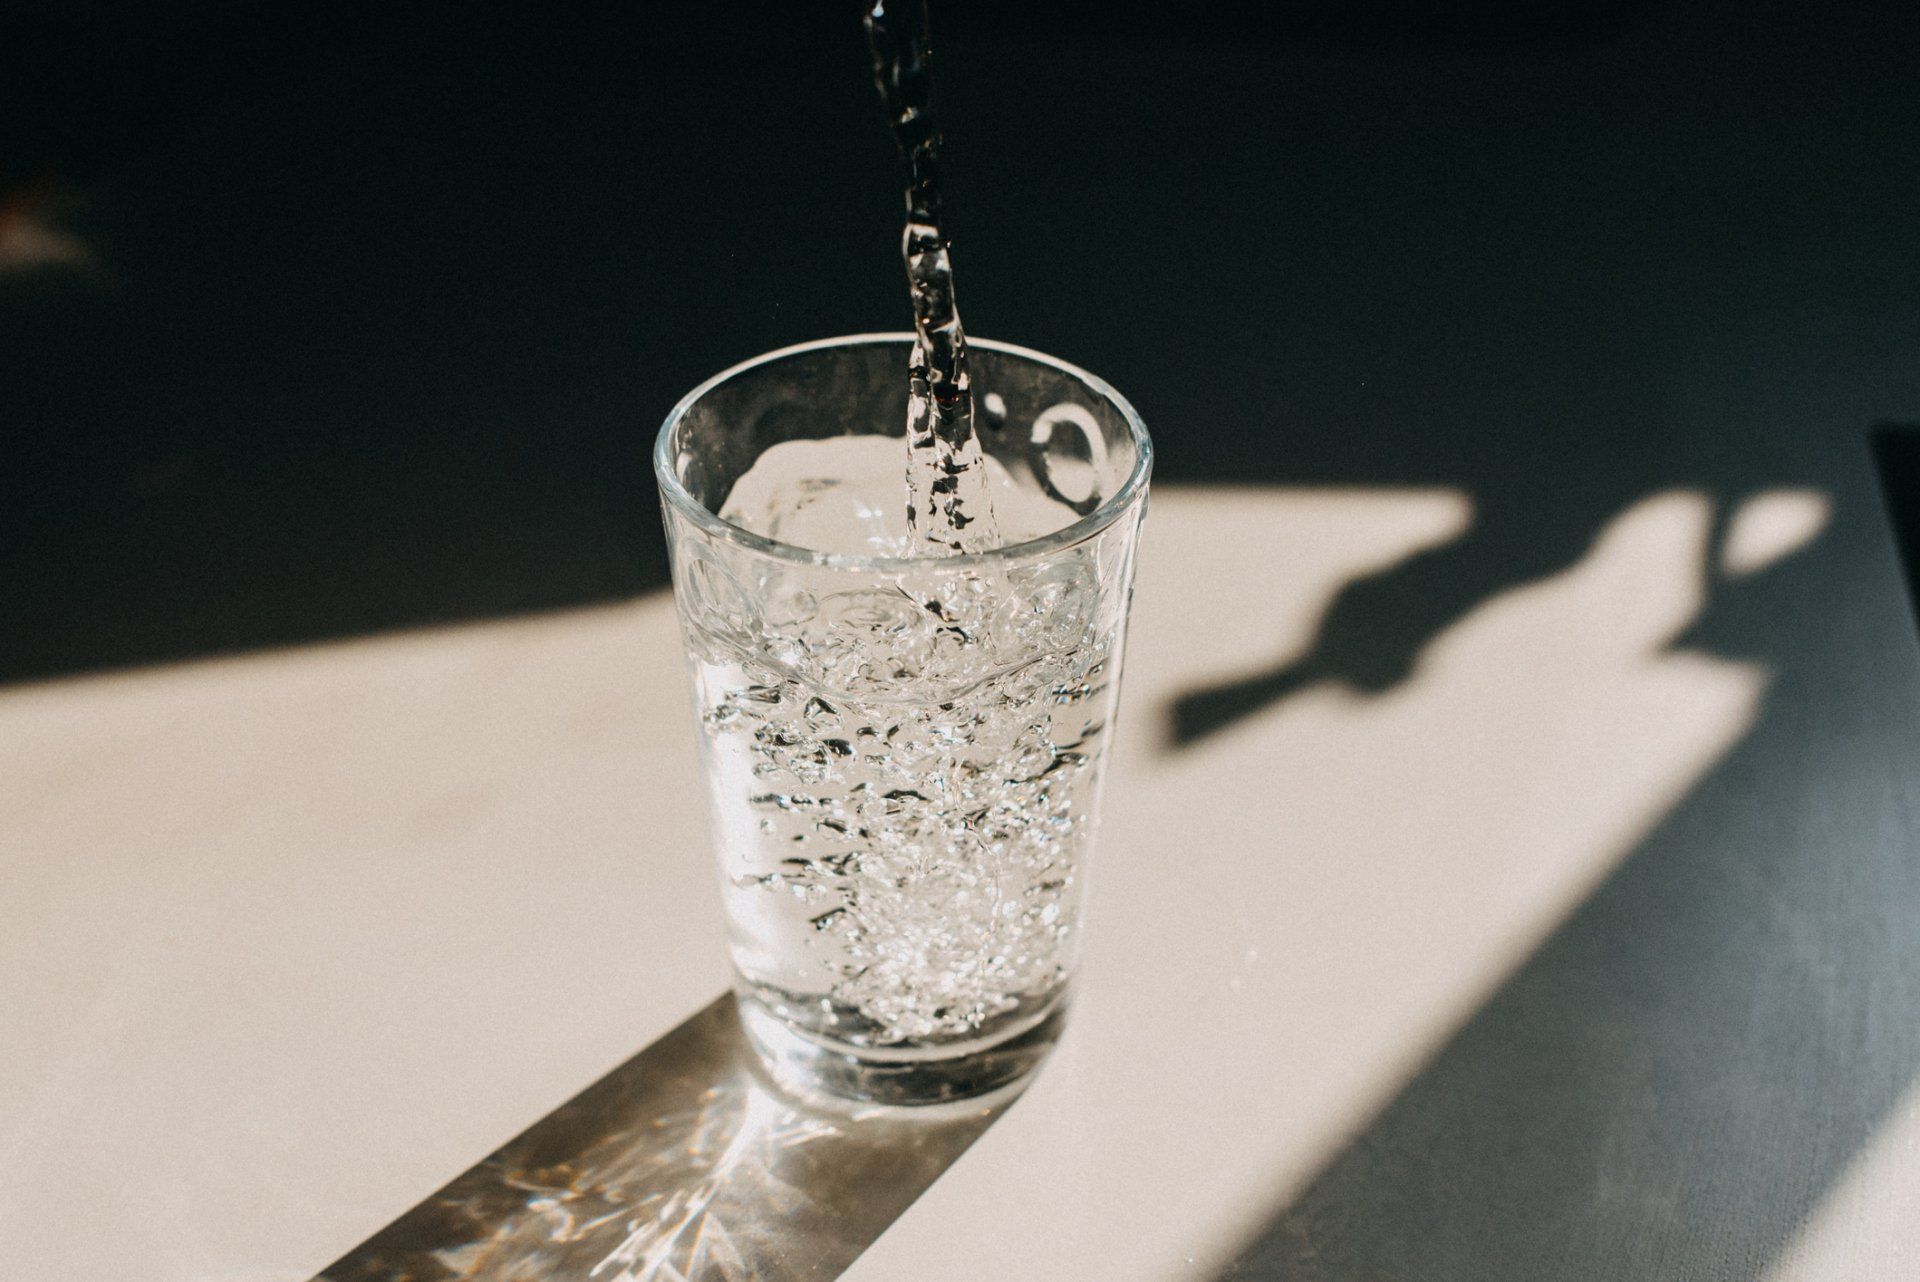 Water being poured in a glass — Edgewood, MD — GEO Environmental Services